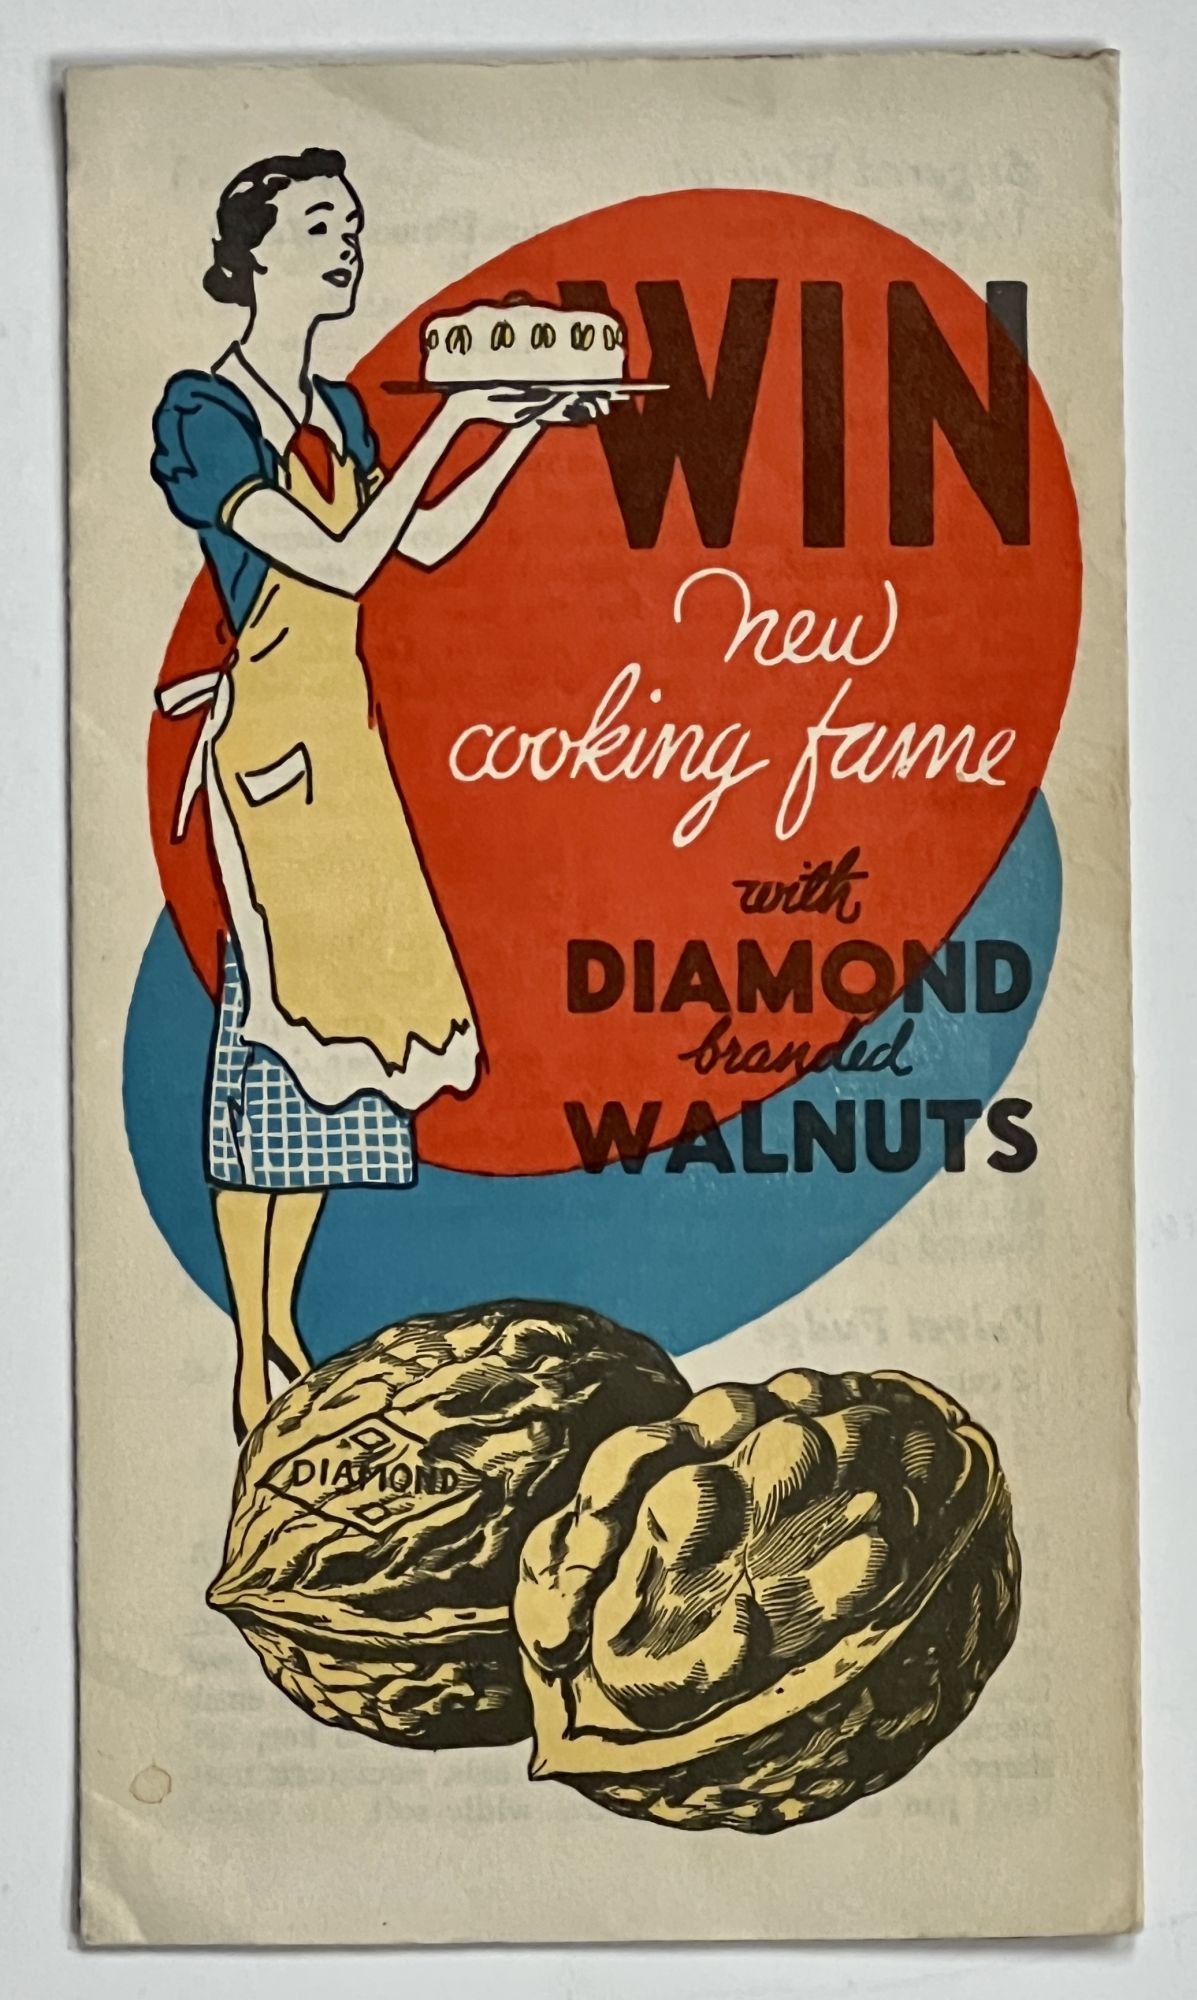 [California Walnut Growers Association publication] - WIN NEW COOKING FAME With DIAMOND BRANDED WALNUTS. Here's Menu Magic in a Nutshell